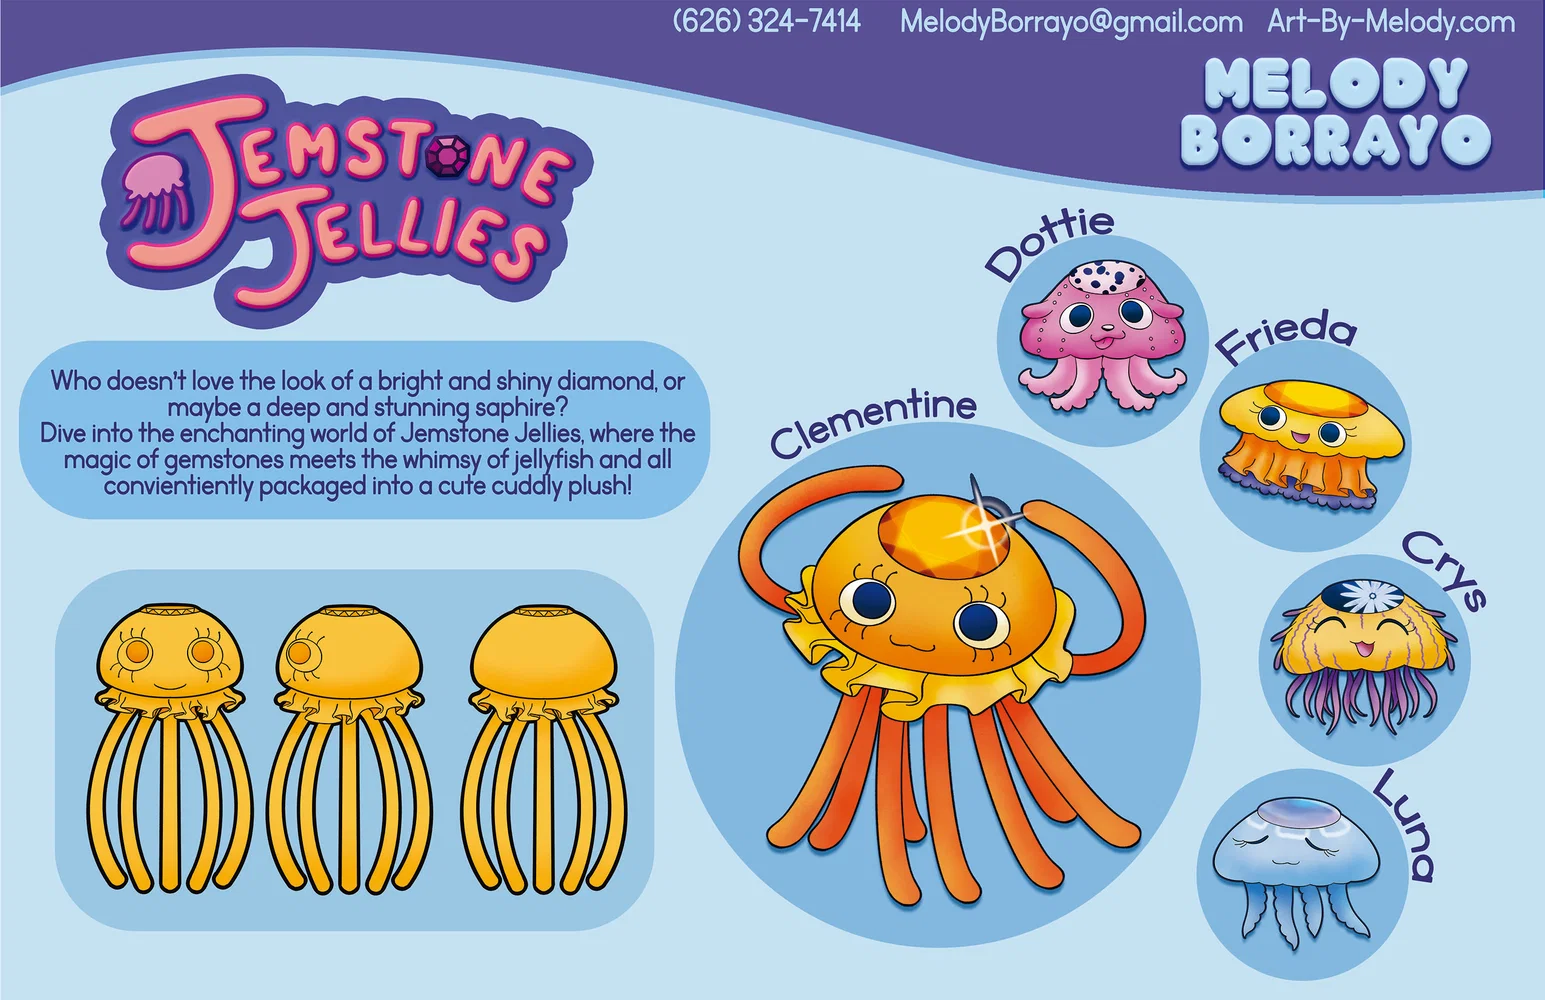 Jemstone Jellies. An original collectible plush line concept. Cute and whimsical jellyfish adorned with a beautiful and shiny stone on their head.